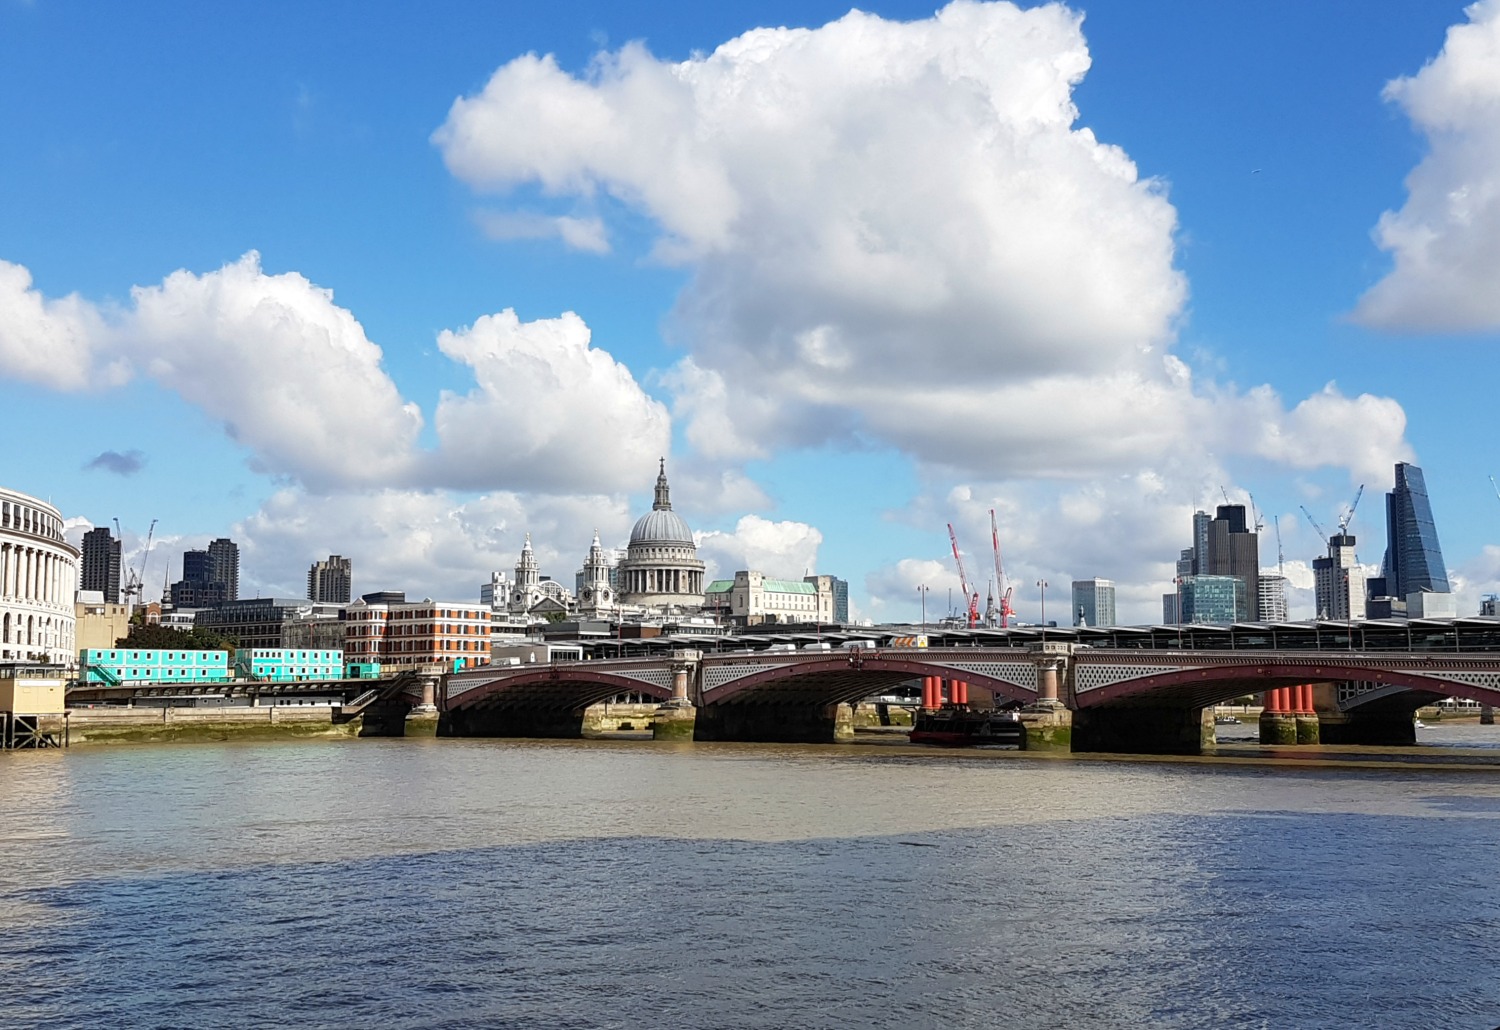 View along the Thames with one of the bridges and St Paul's visible